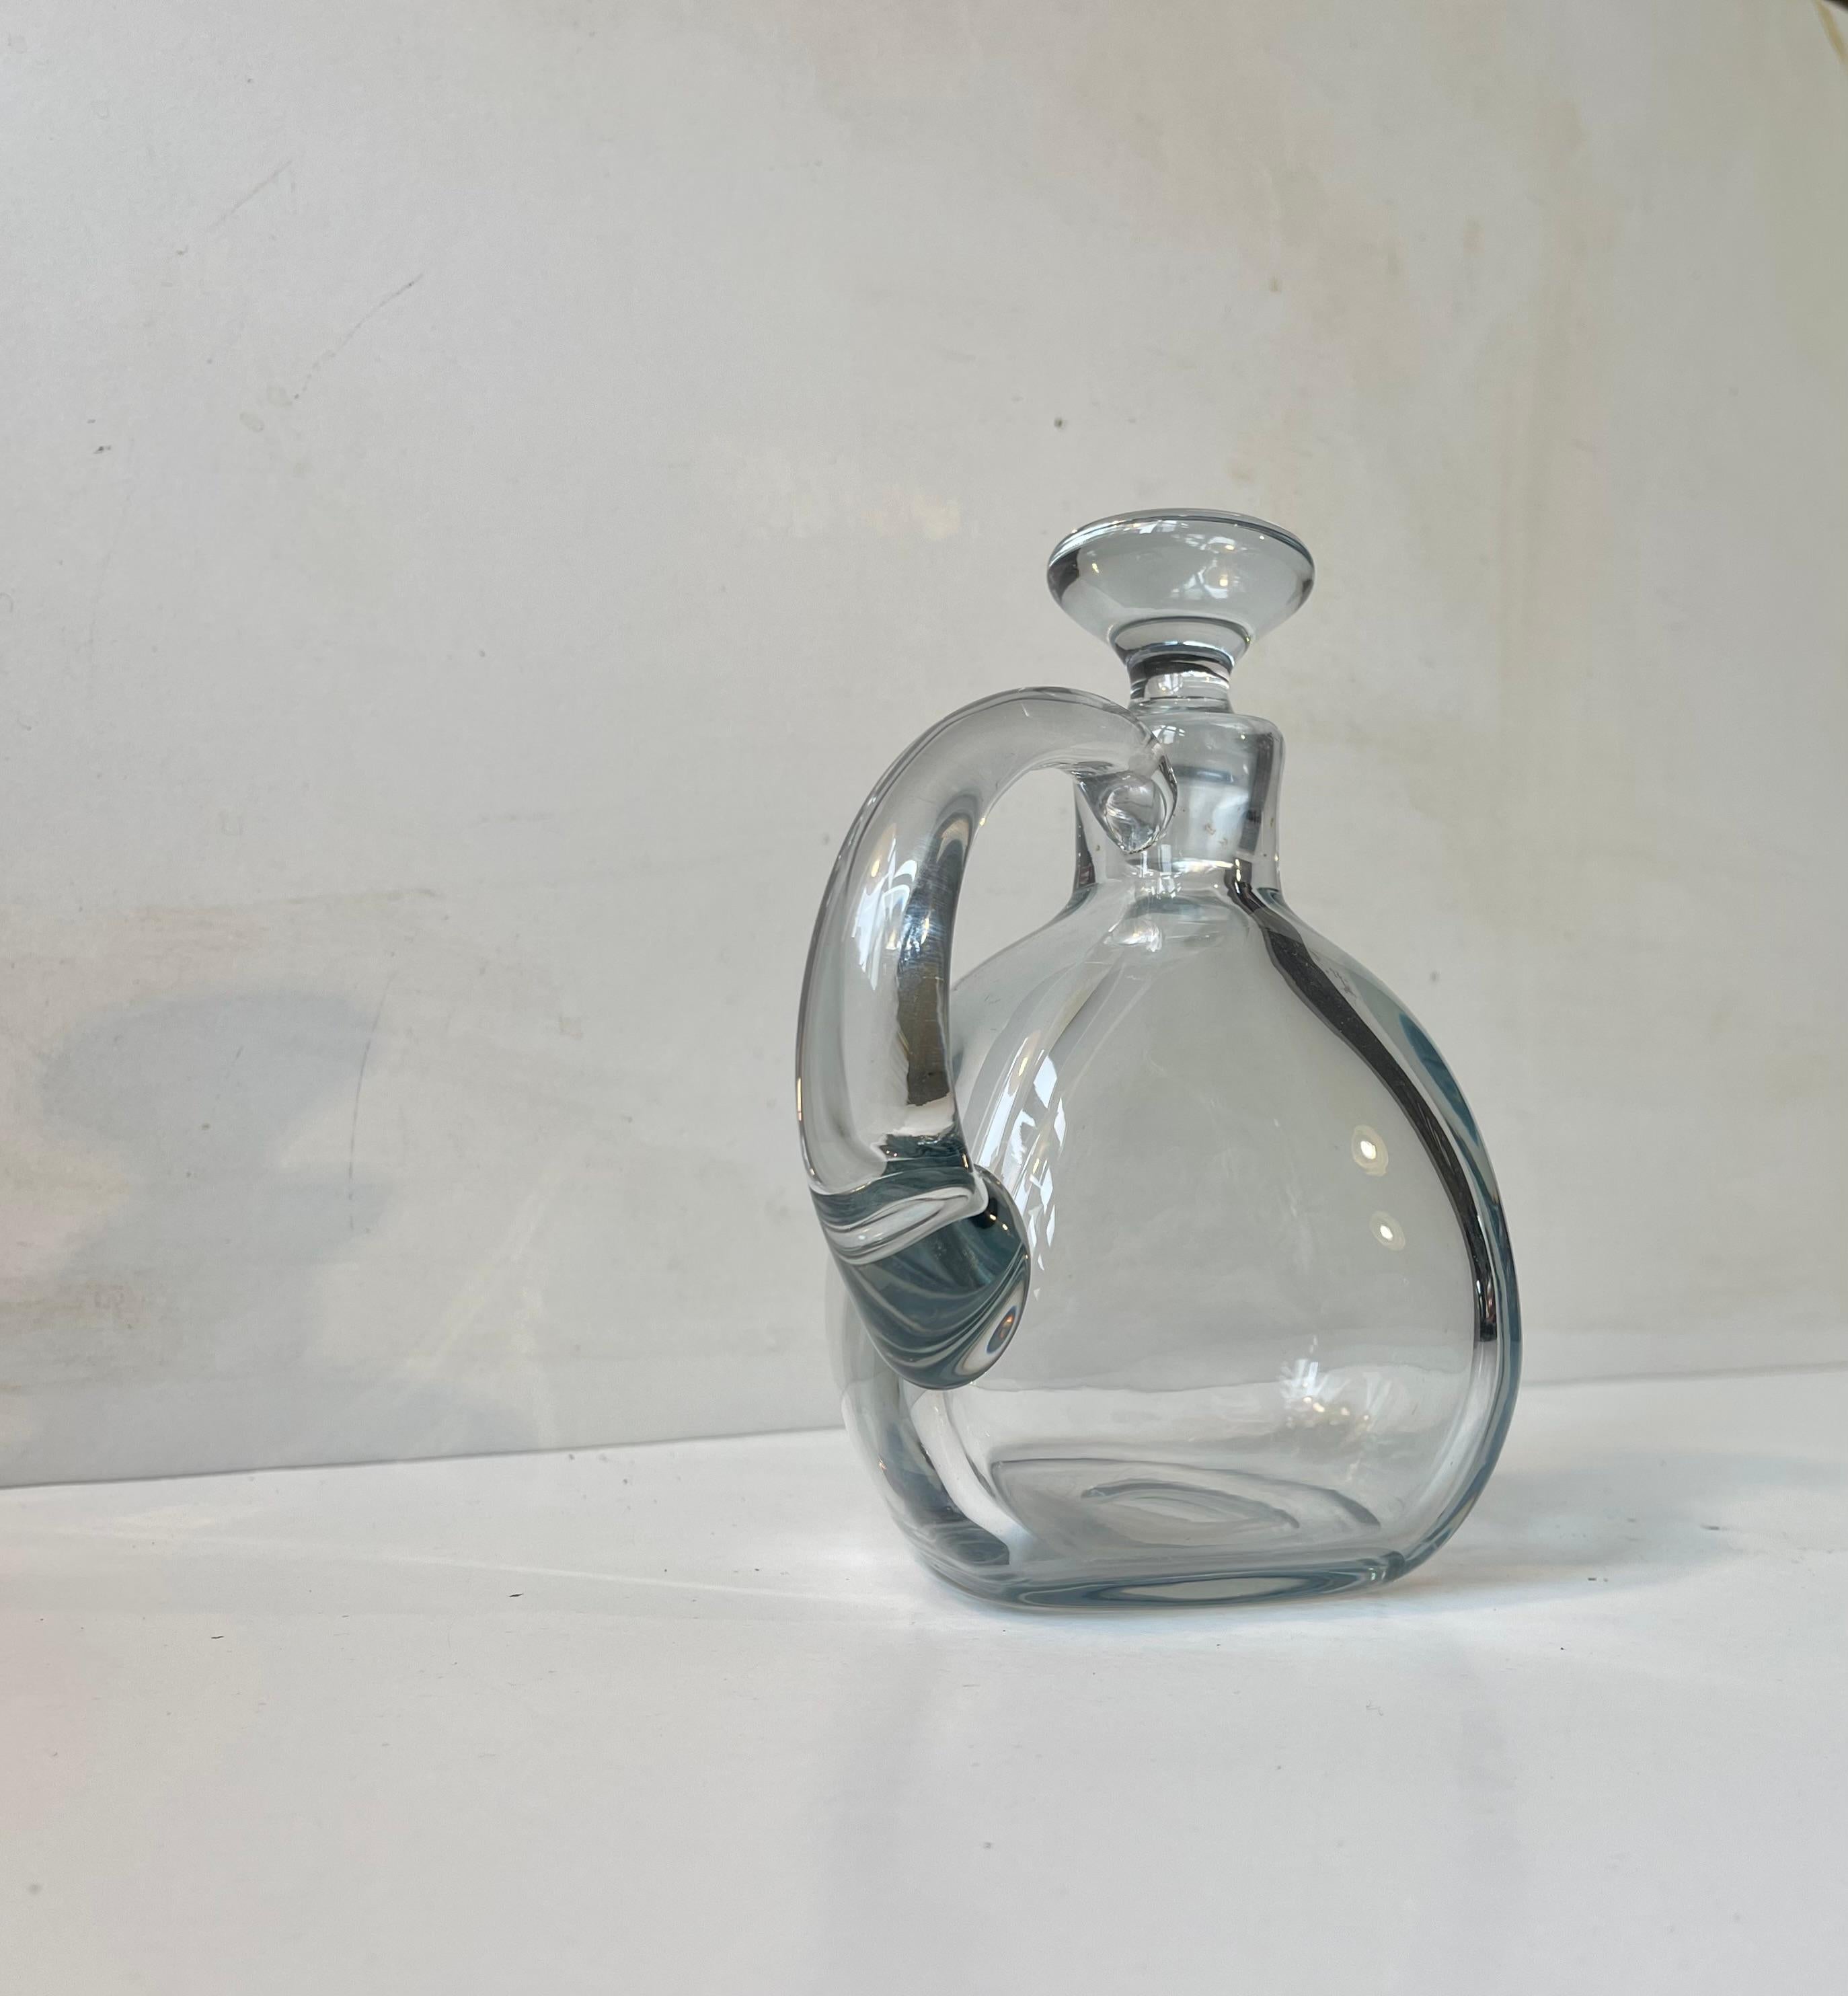 Free-form hand-blown decanter in blue-tinted glass. Made at Holmegaard in Denmark circa 1960-70. Probably designed by either Jacob E. Bang or Per Lütken. Un-catalogued however.
Very well-kept and clean. 

Measurements: H: 18 cm, W: 17 cm (with